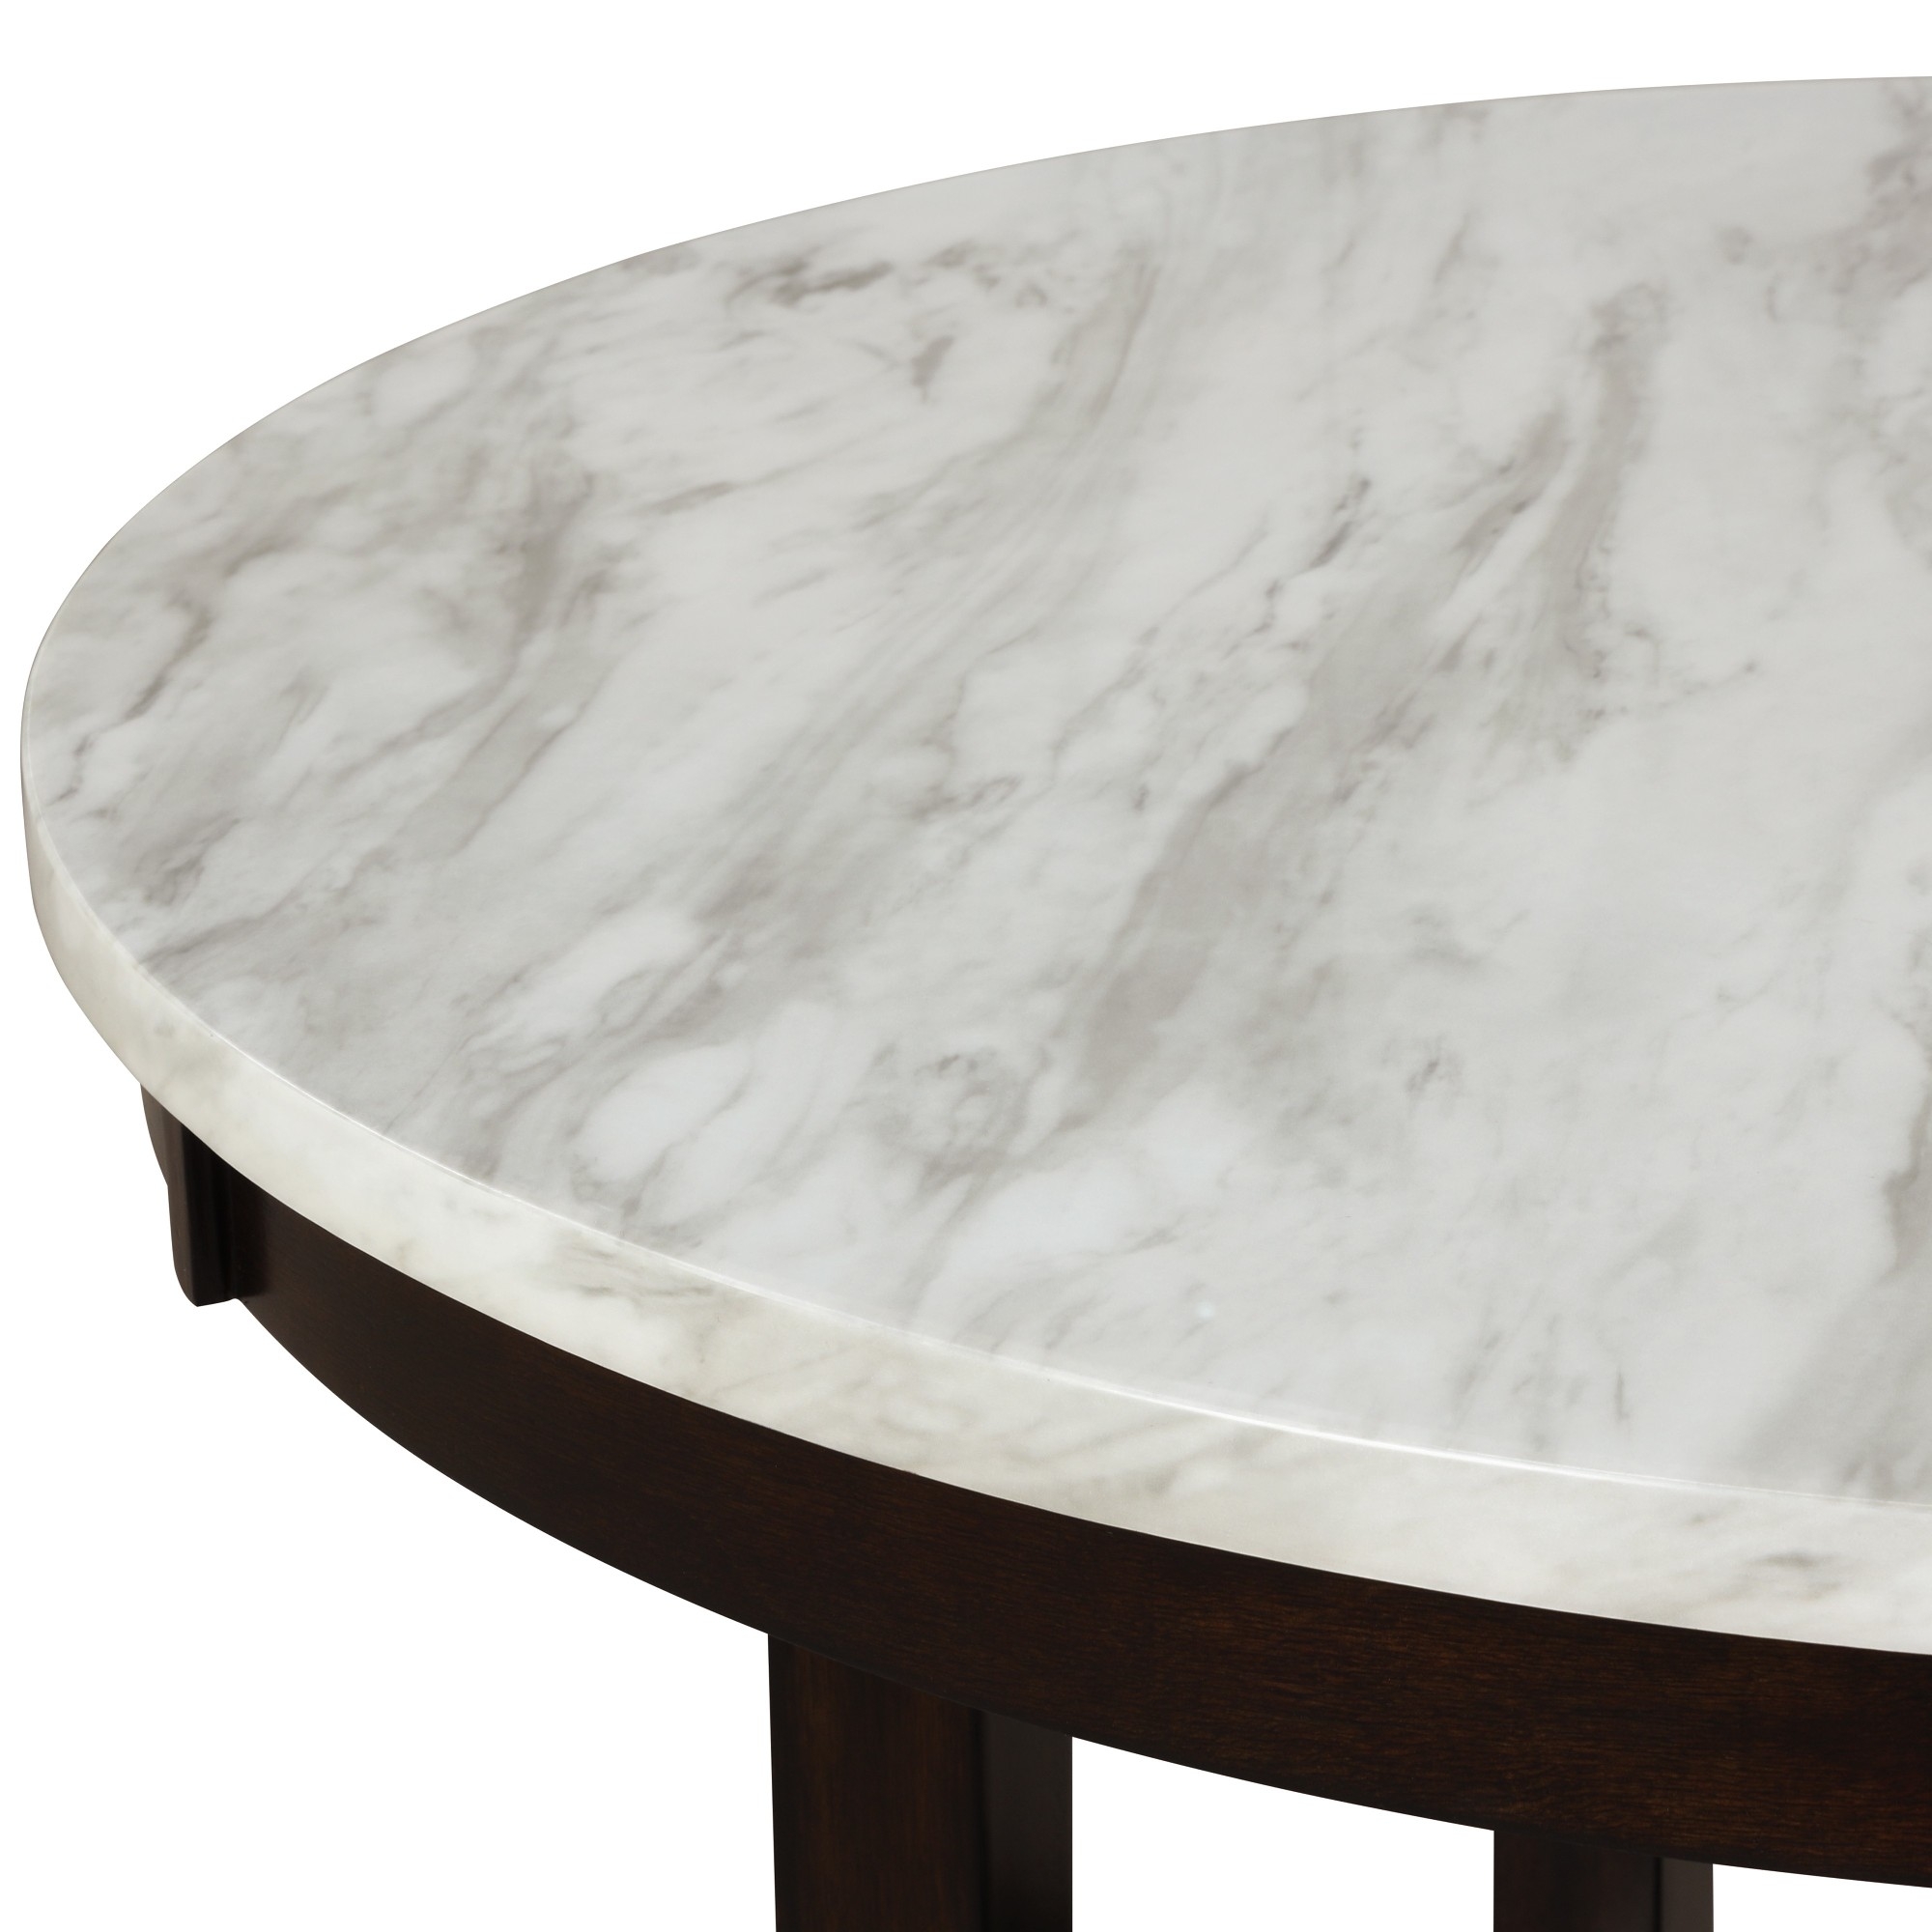 Kate 47 Inch Round Dining Table With Faux Marble Top, White And Black- Saltoro Sherpi